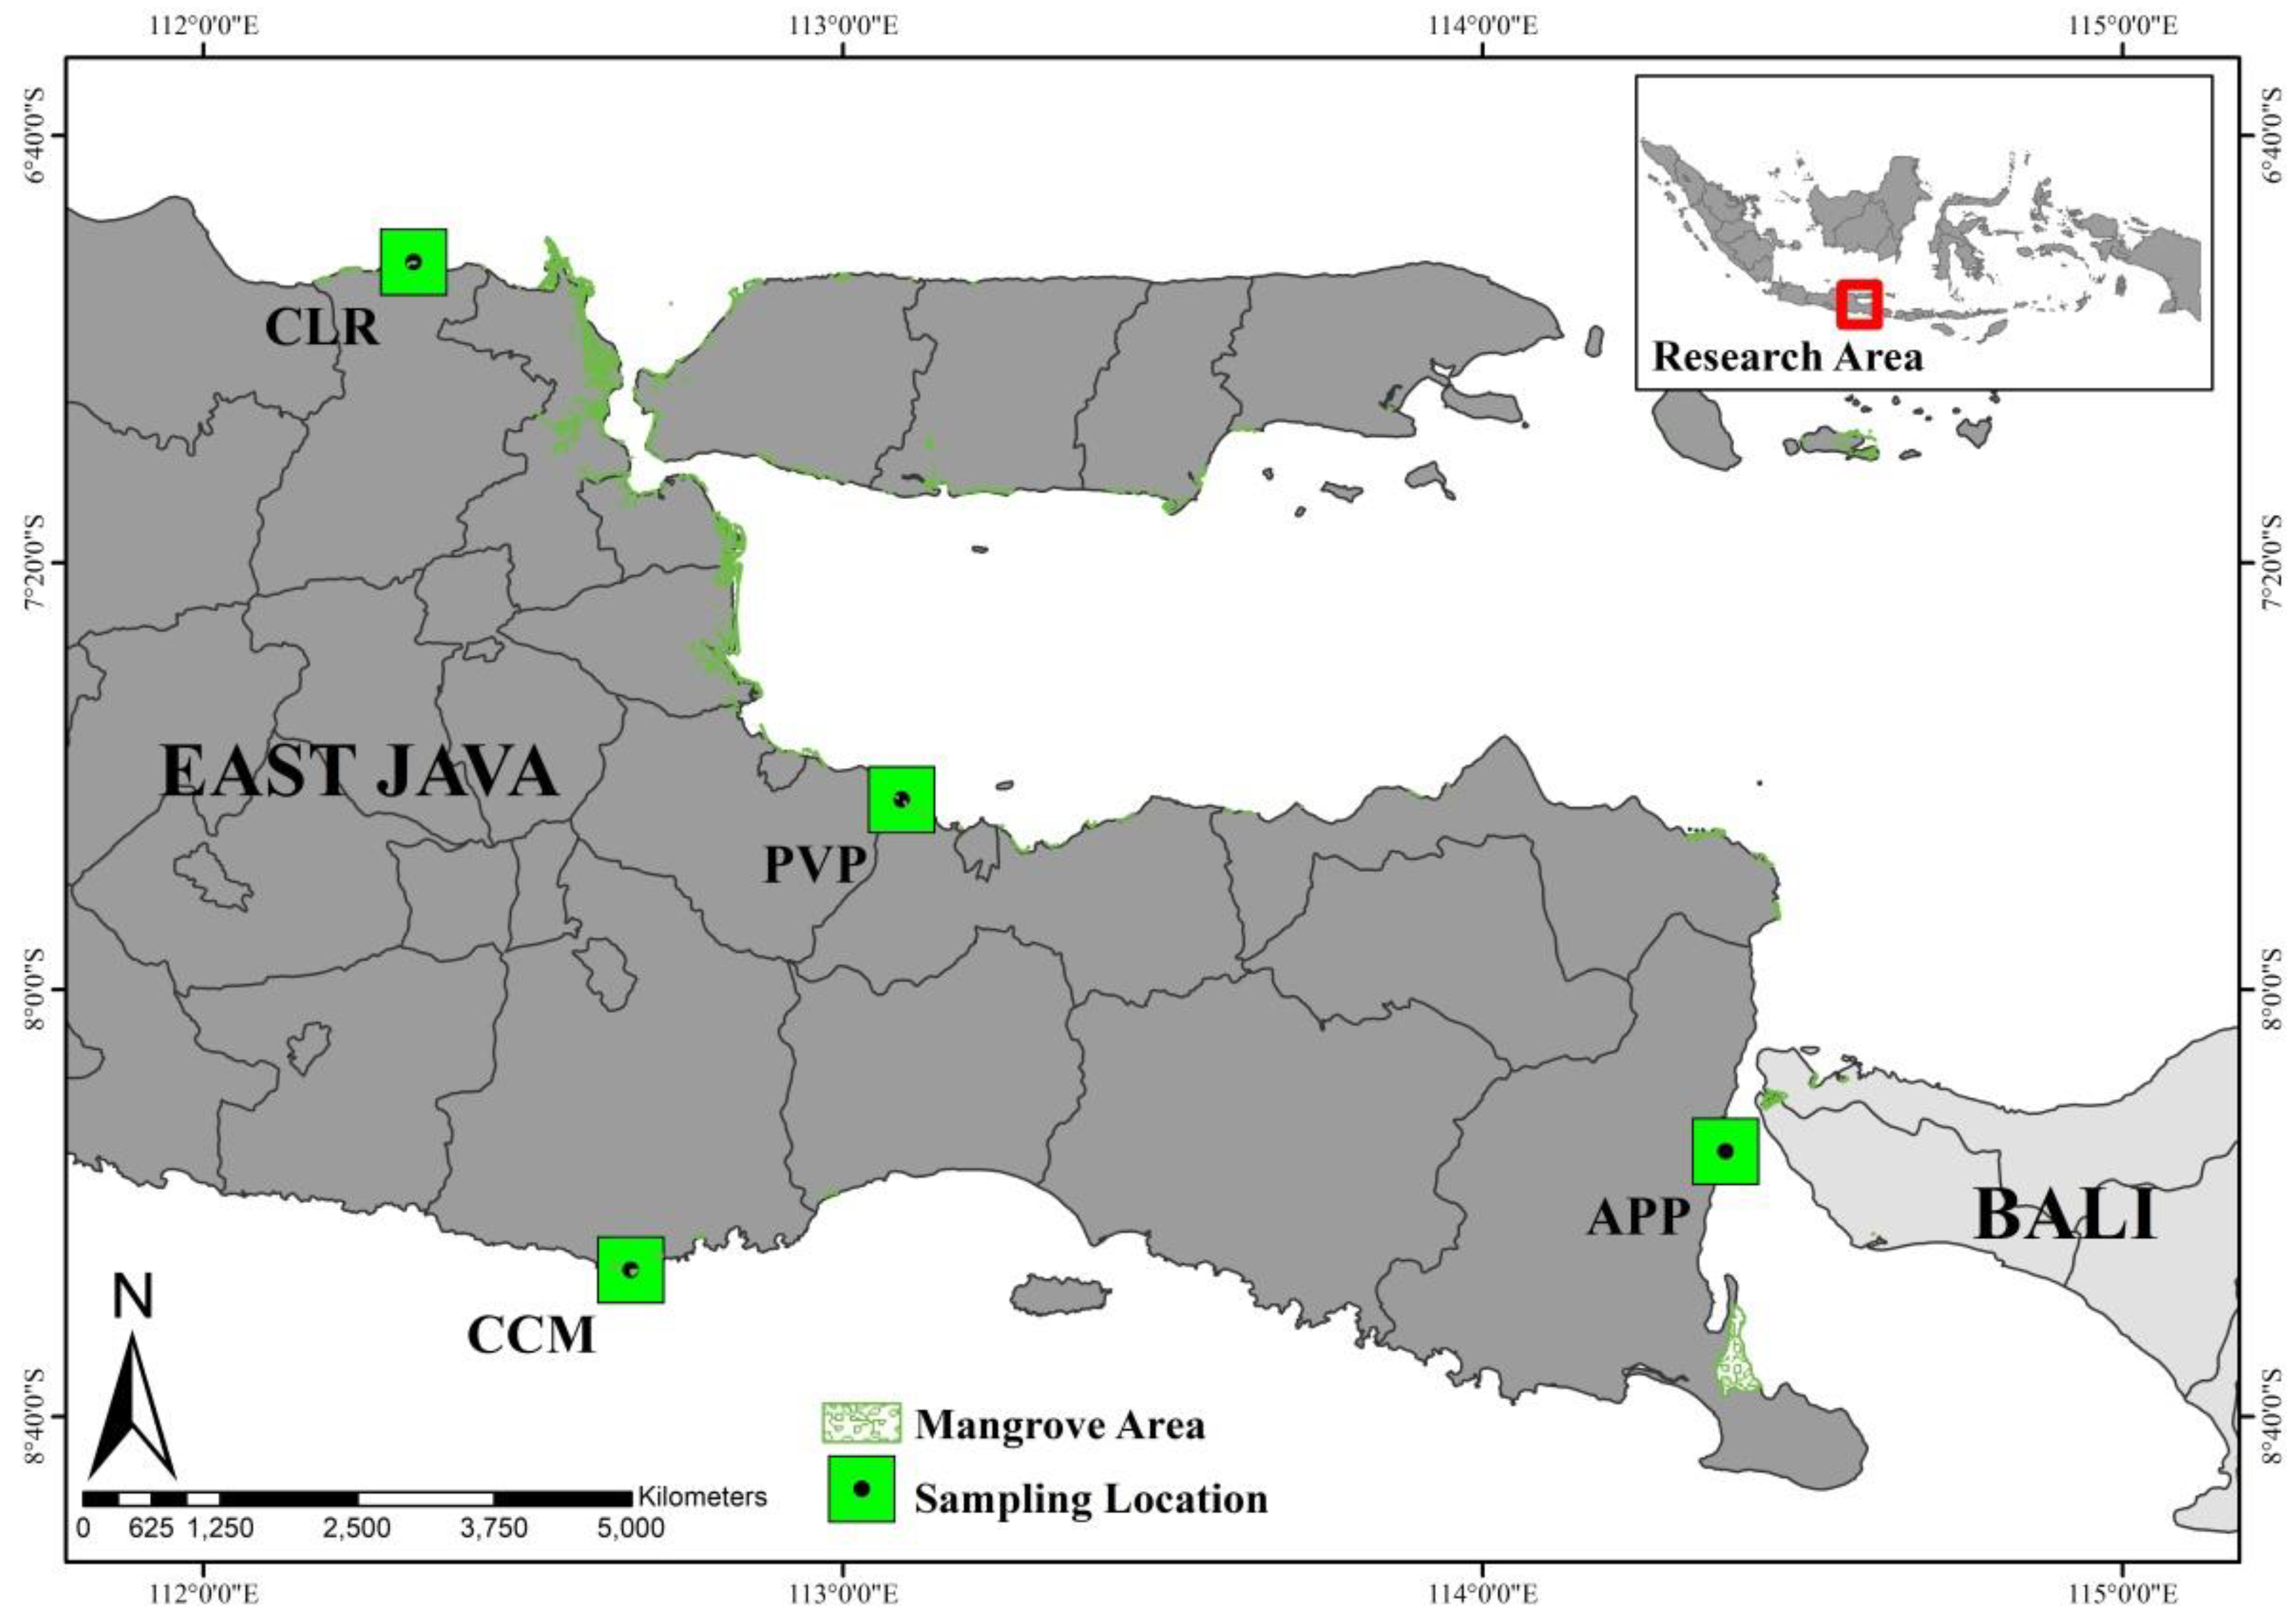 Sustainability Free Full Text Causes And Effects Of Mangrove Ecosystem Damage On Carbon Stocks And Absorption In East Java Indonesia Html